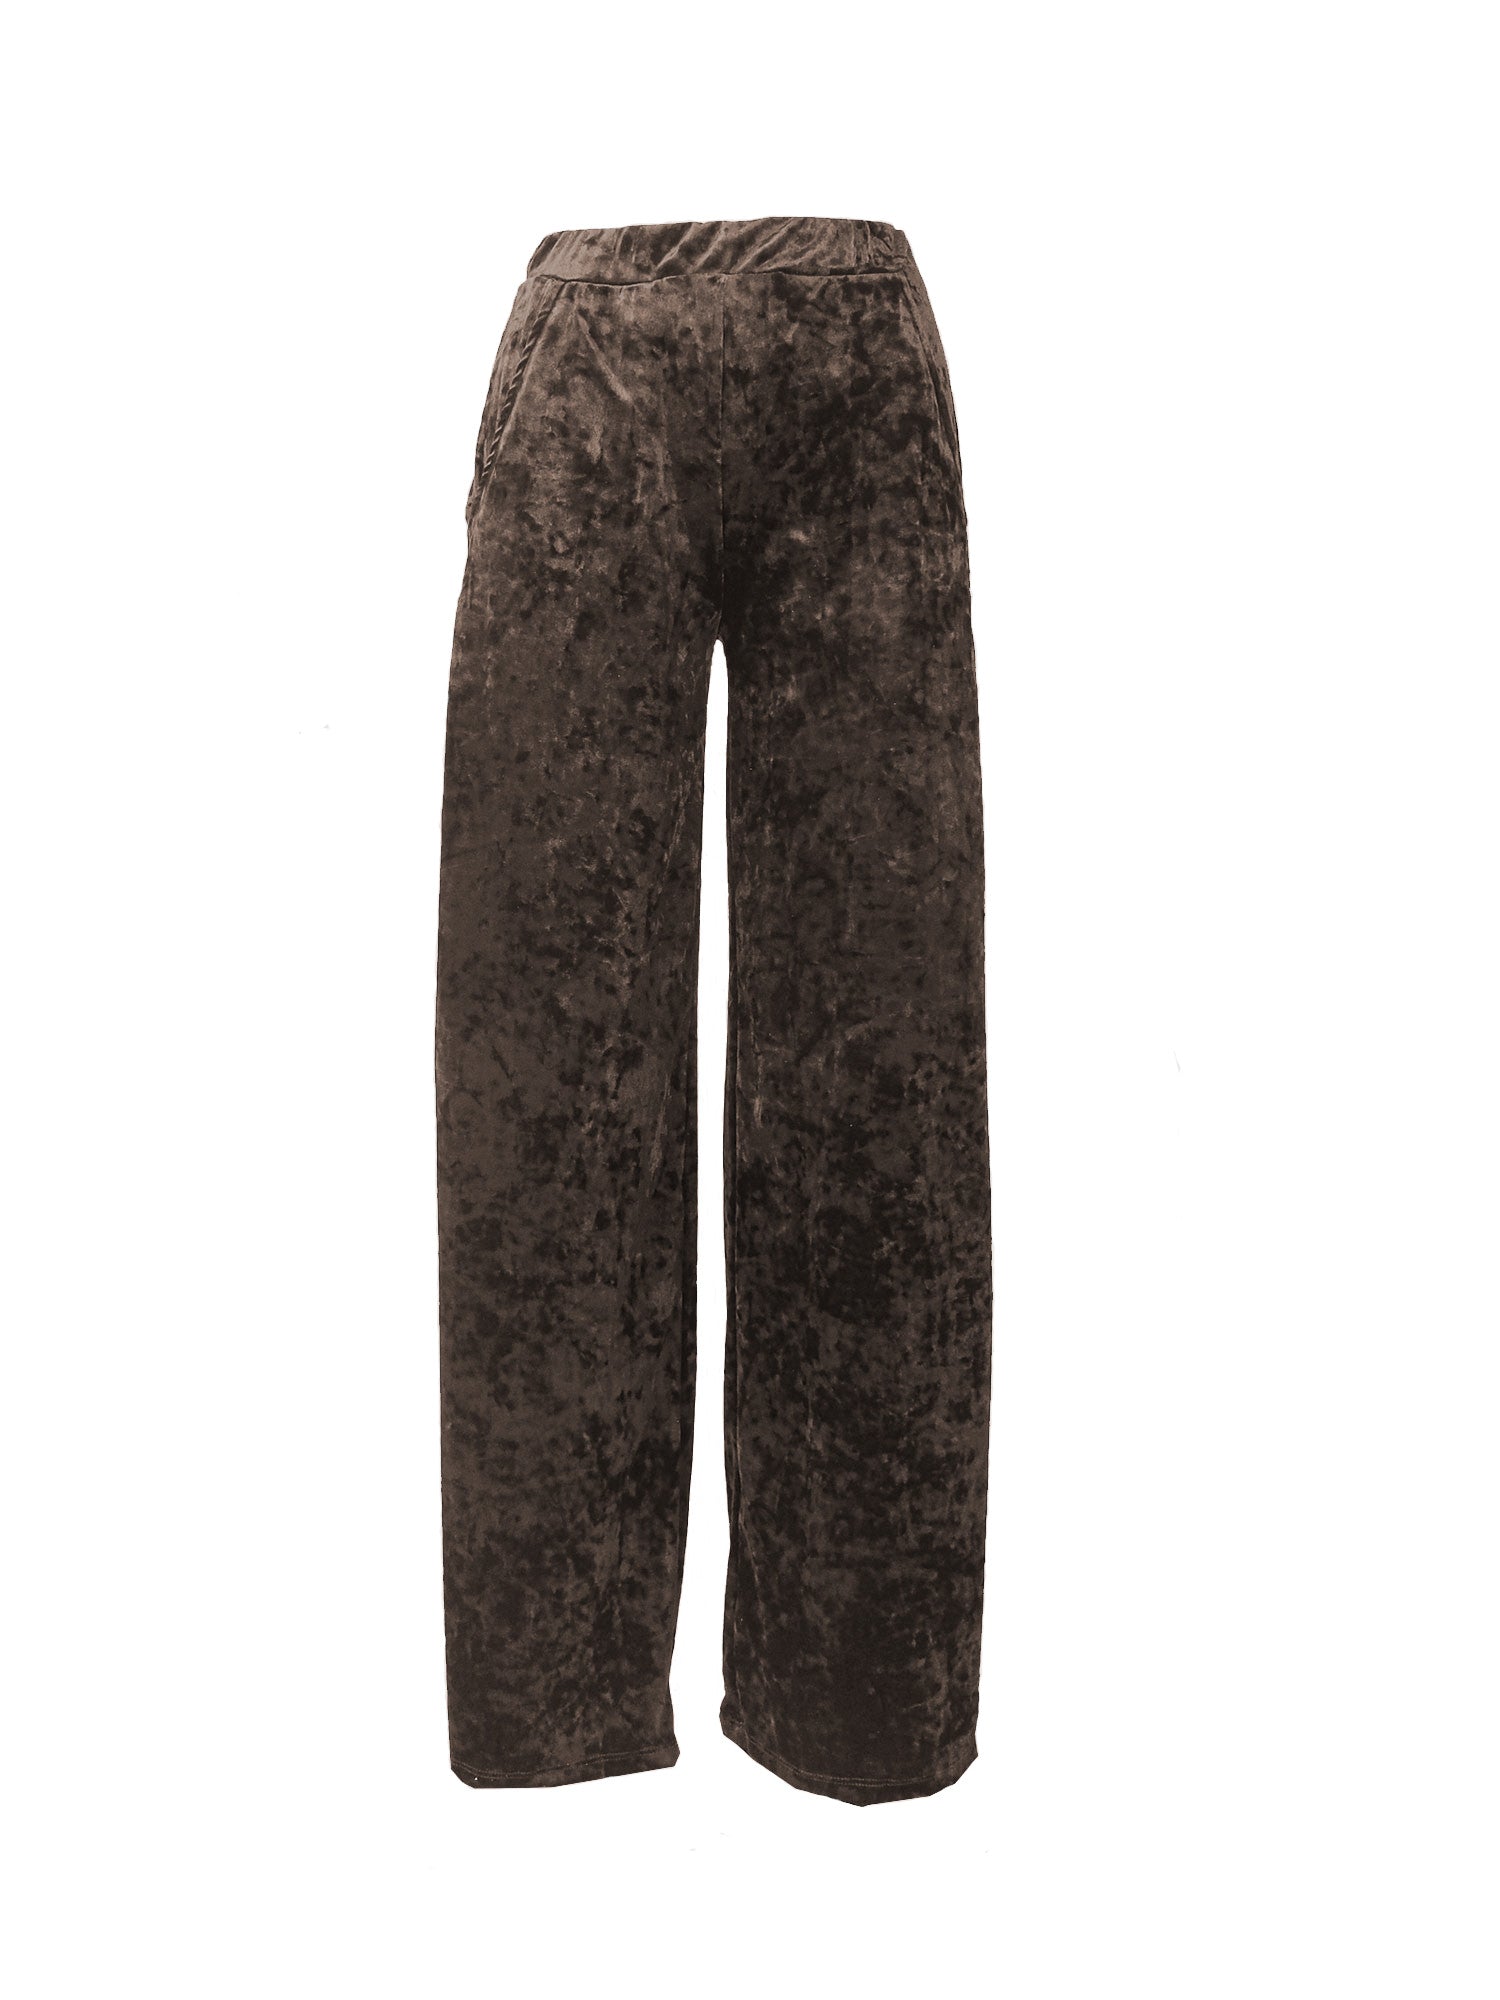 MAXIE - wide-leg chenille trousers in hammered brown